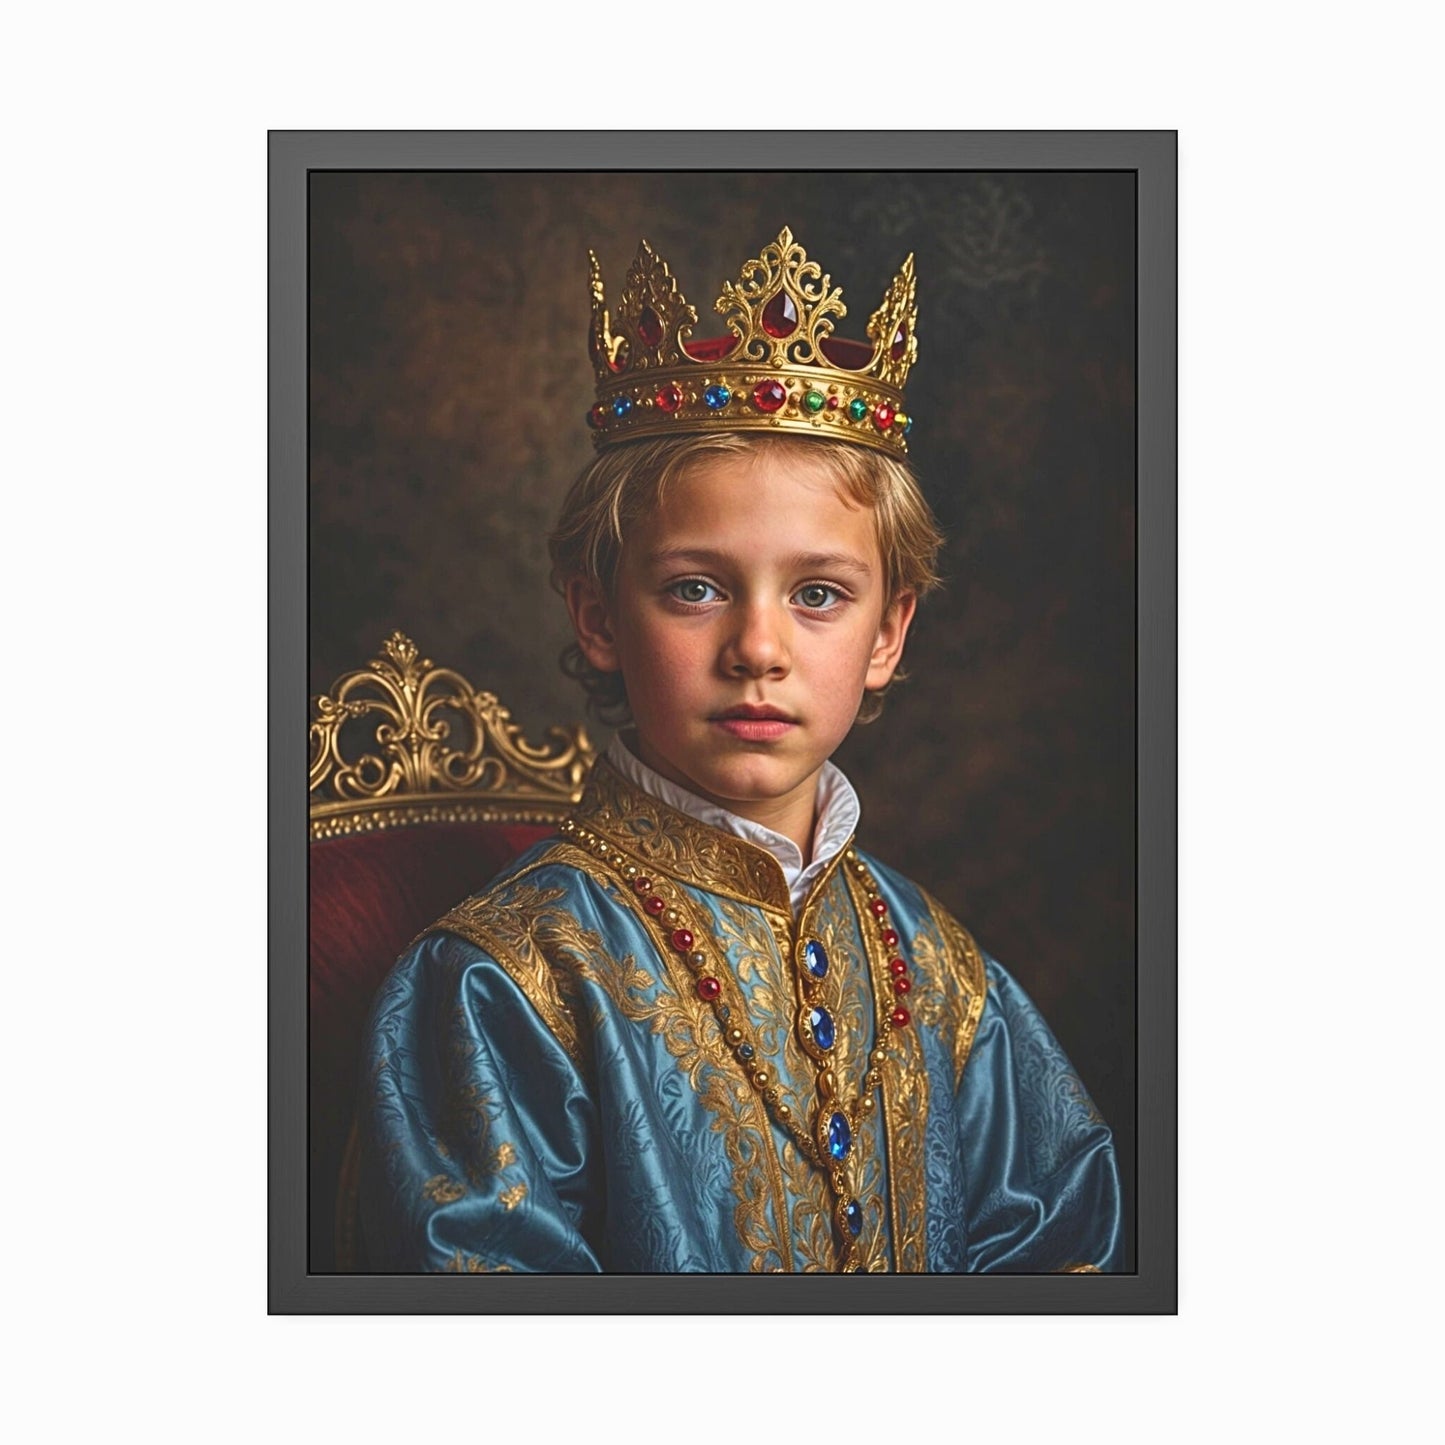 Transform your child's photo into a majestic royal portrait! Our custom portraits are perfect for birthdays, featuring personalized artwork of your little King or Queen. Capture the essence of royalty with unique Renaissance-inspired designs that make cherished gifts for any occasion.